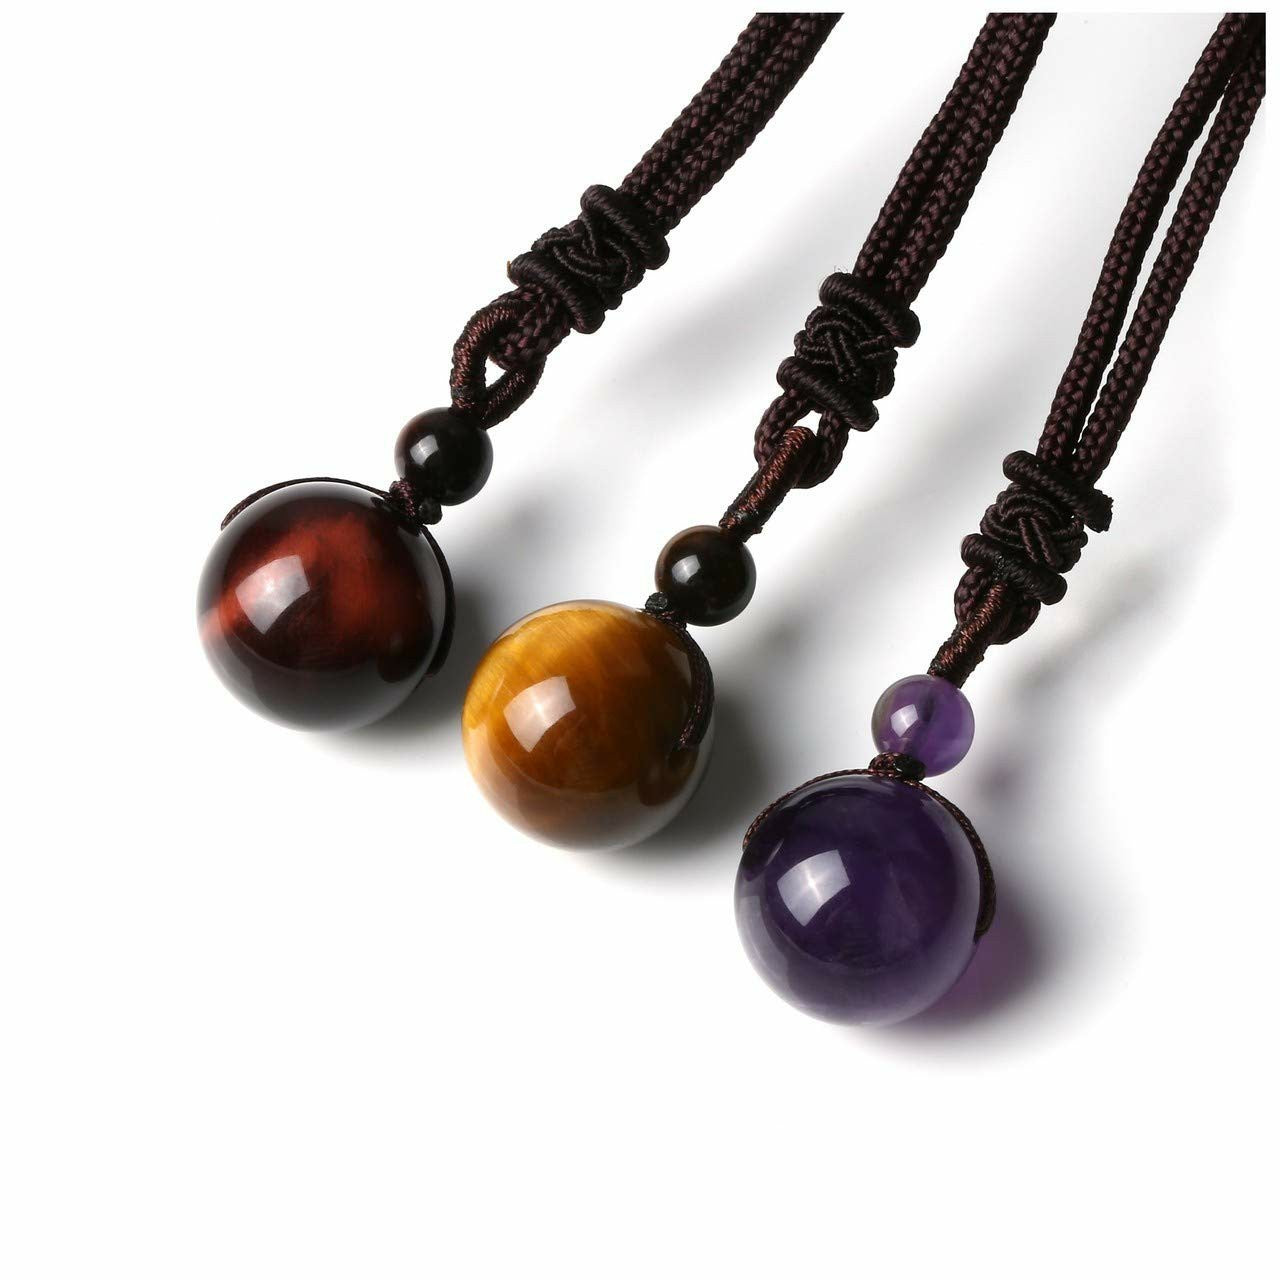 Fashion 16mm Natural Obsidian Pendant Amethyst Necklace For Men And Women